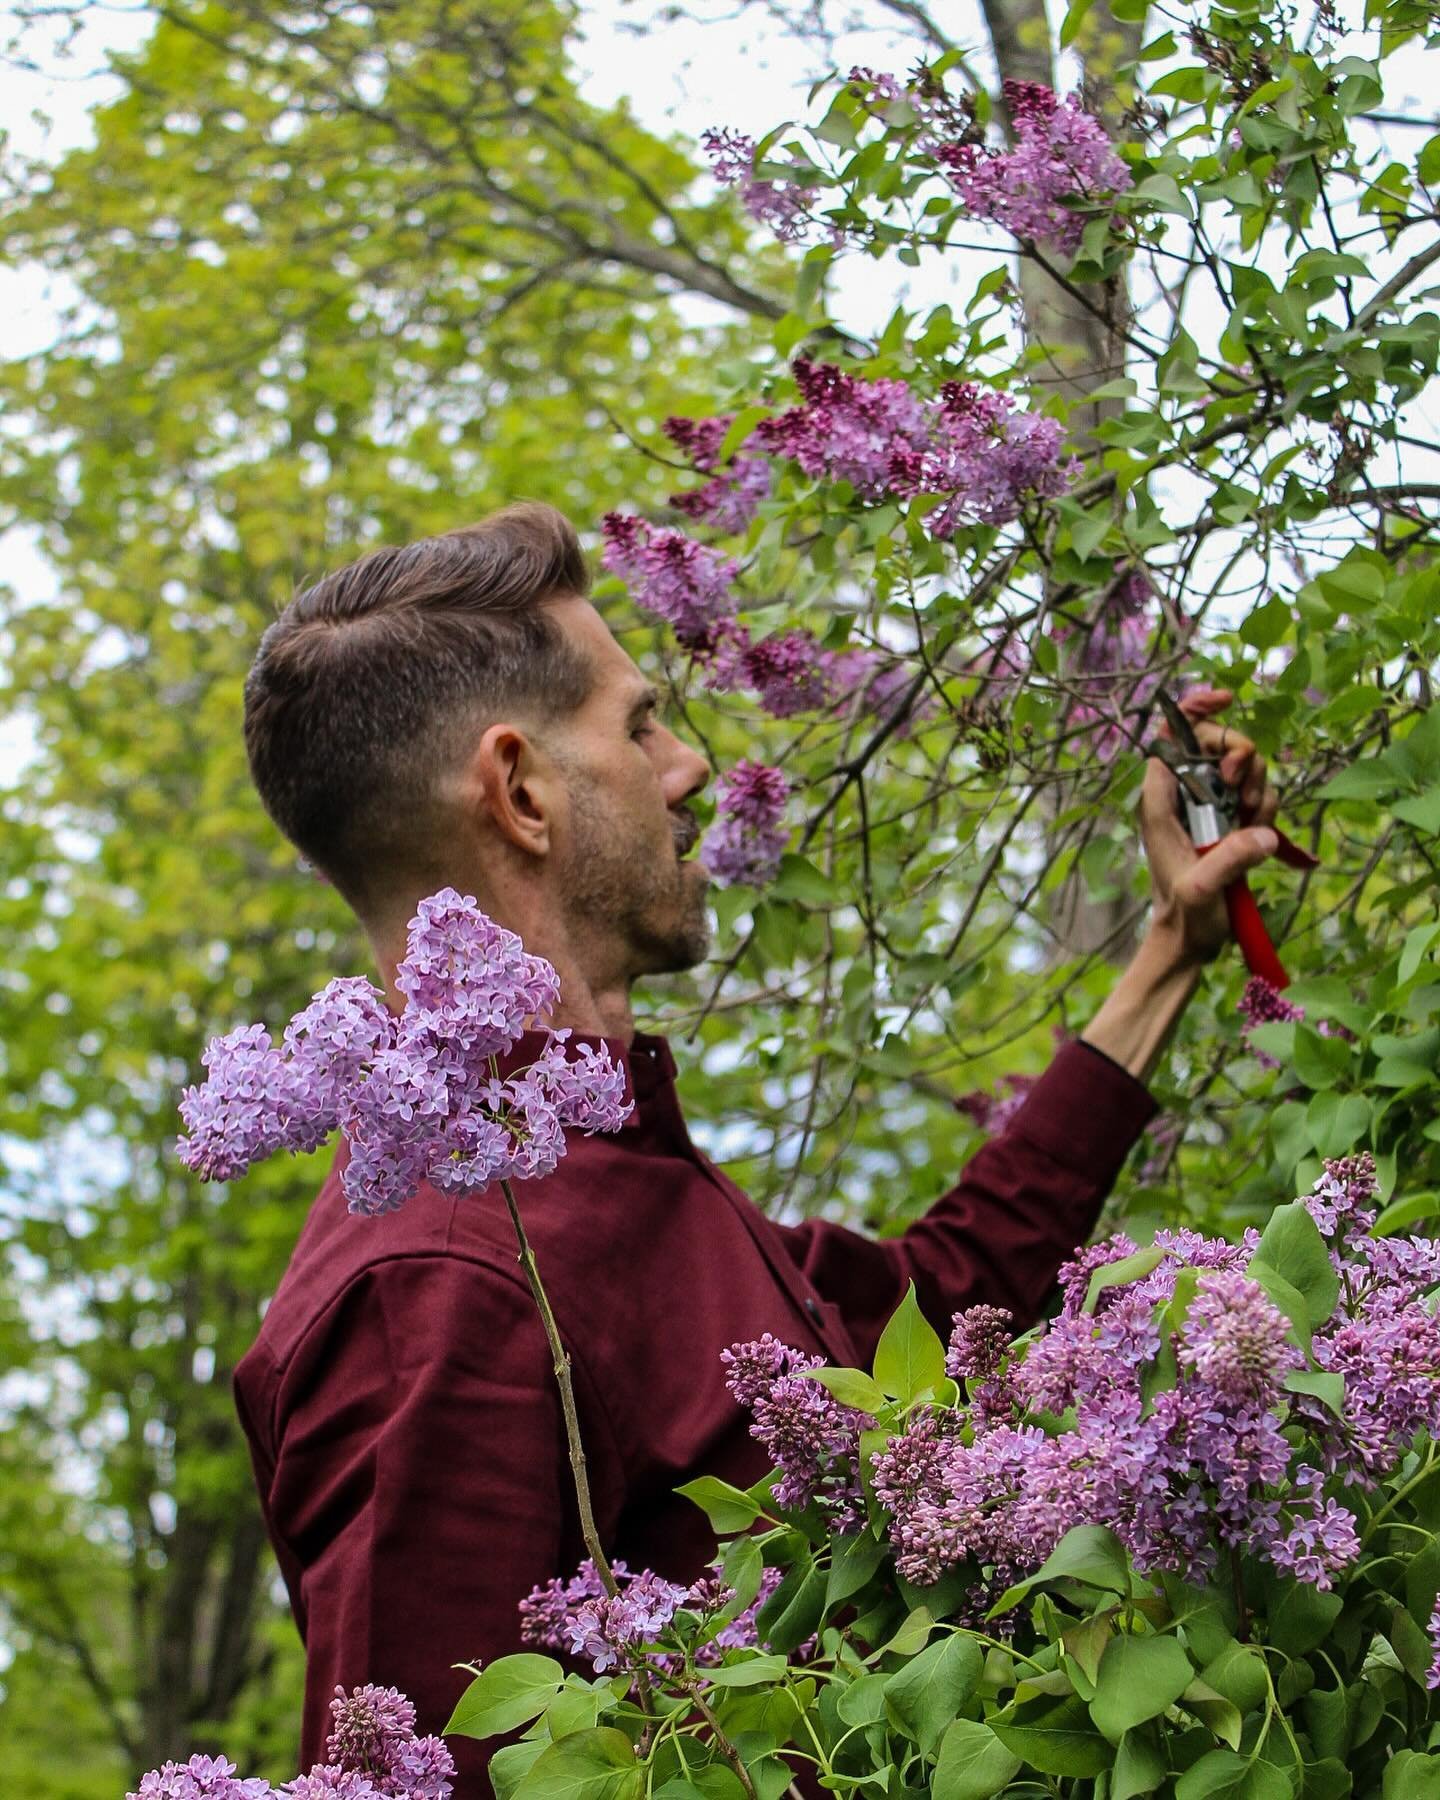 We&rsquo;re loading up on the fleeting lilacs for this weekend on the knoll. I cherish having these mature stands of old lilacs right outside our door, that I can gather by the armful and craft a scented atmosphere in the shop once a year.